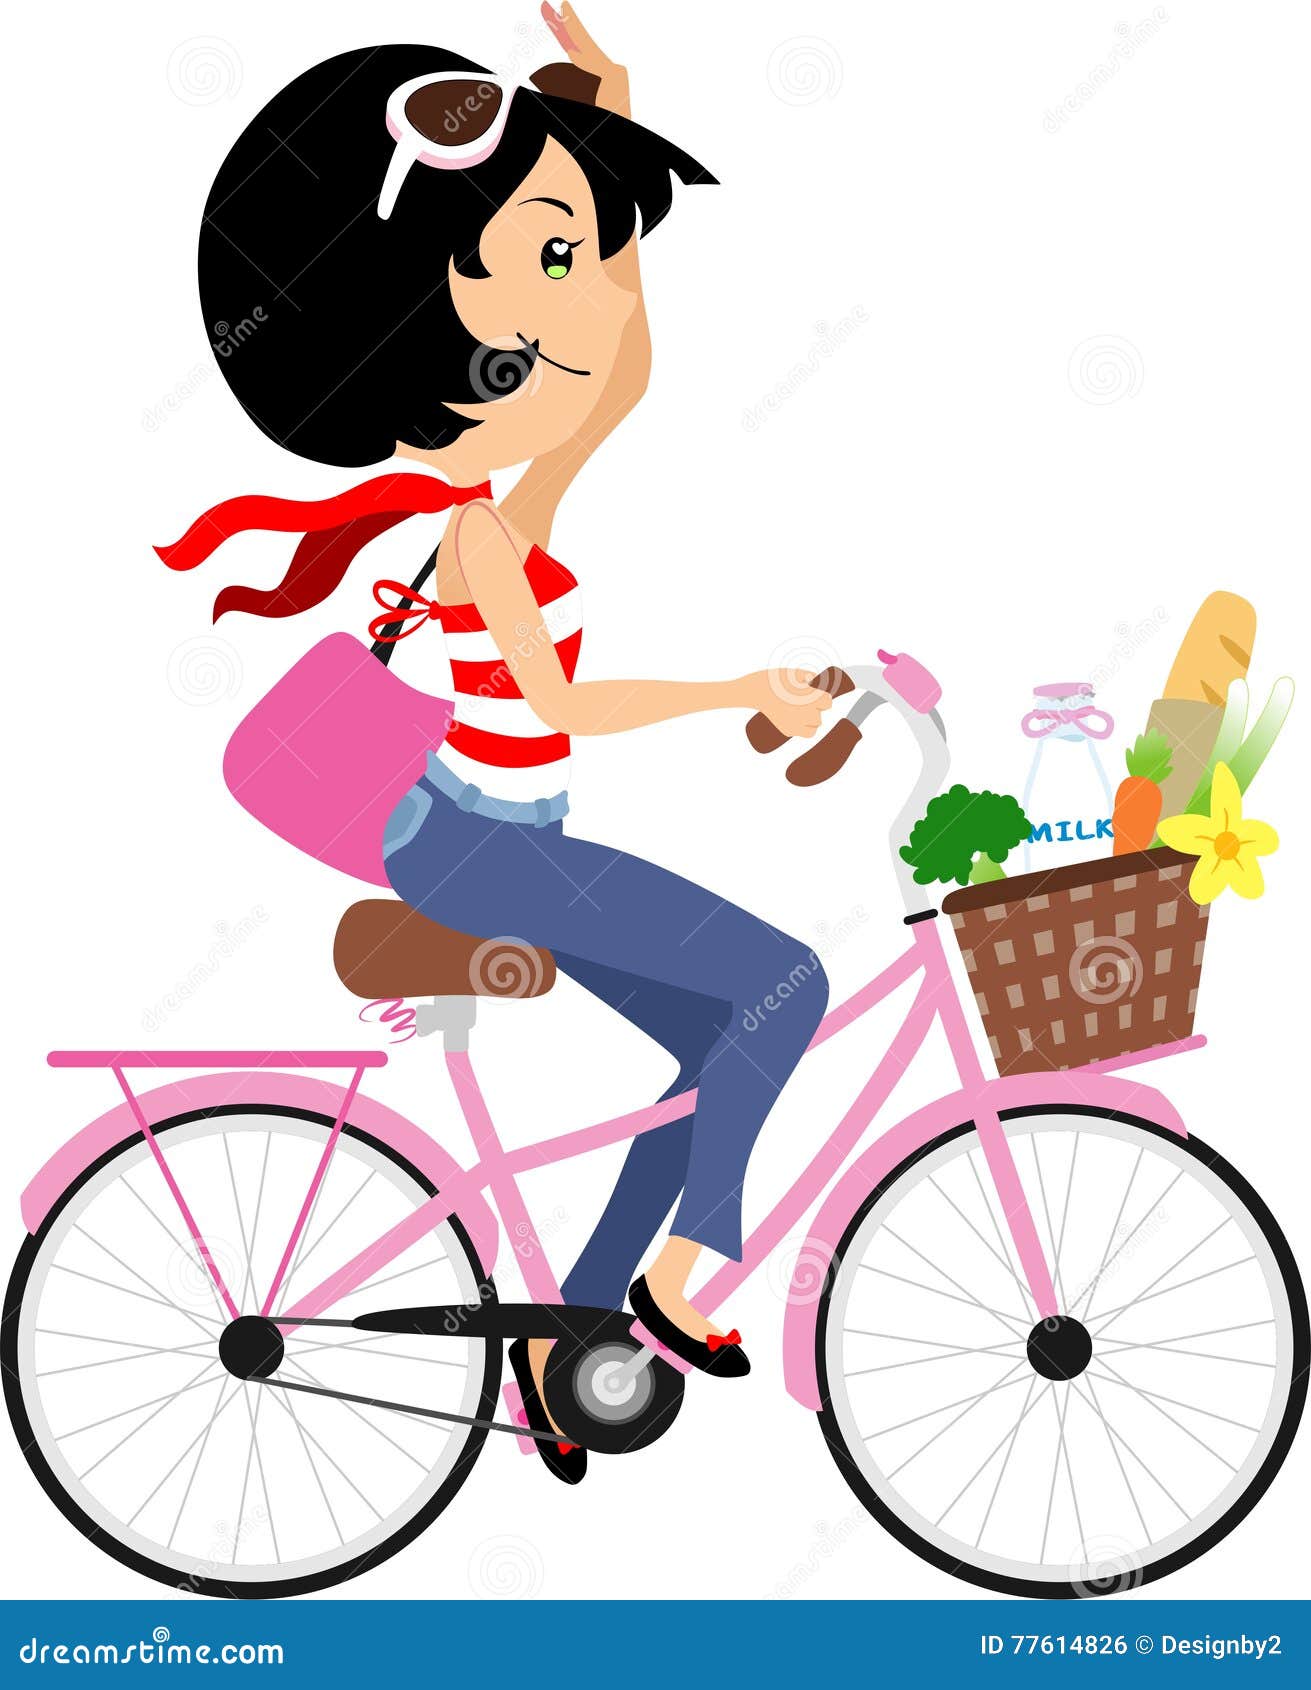 clipart girl riding bicycle - photo #45